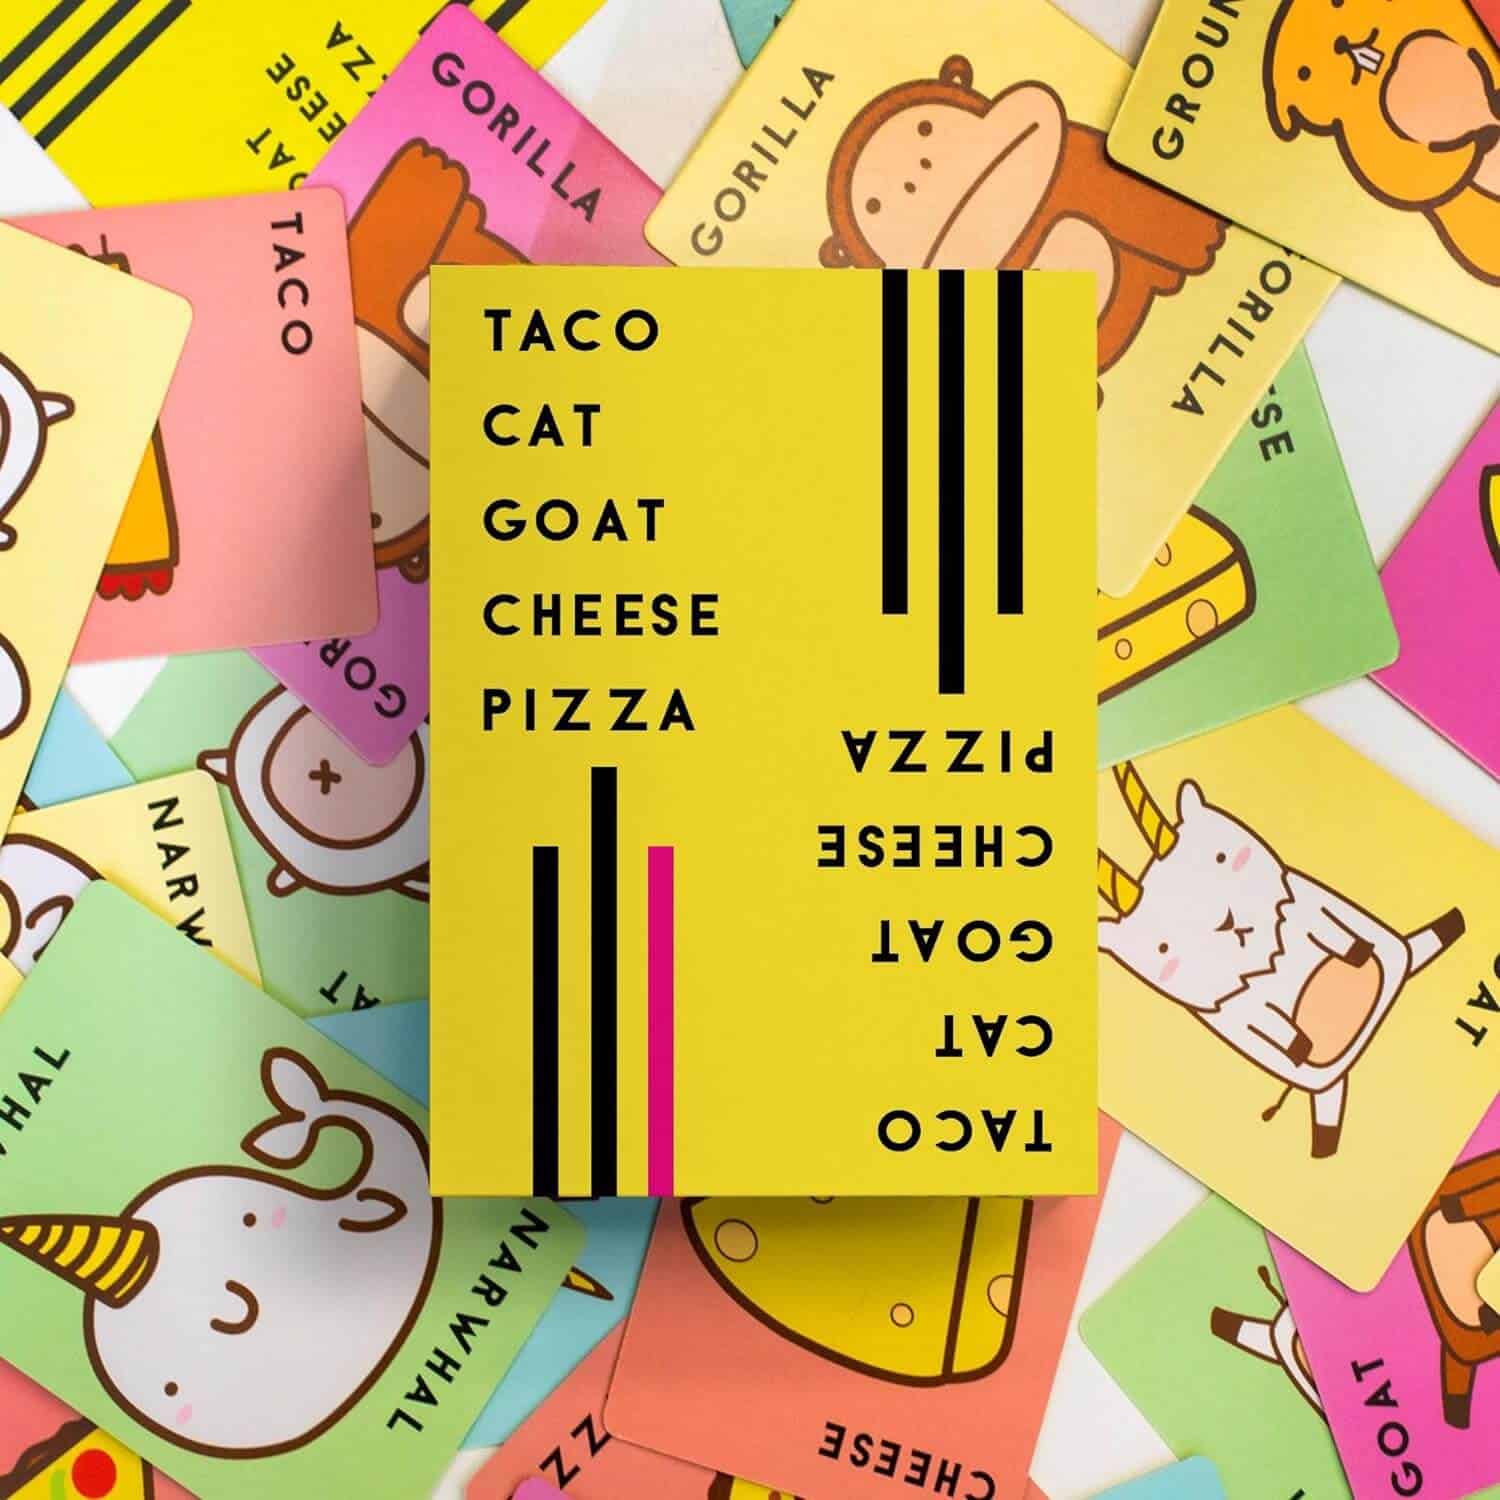 fun christmas gifts: Taco Cat Goat Cheese Pizza